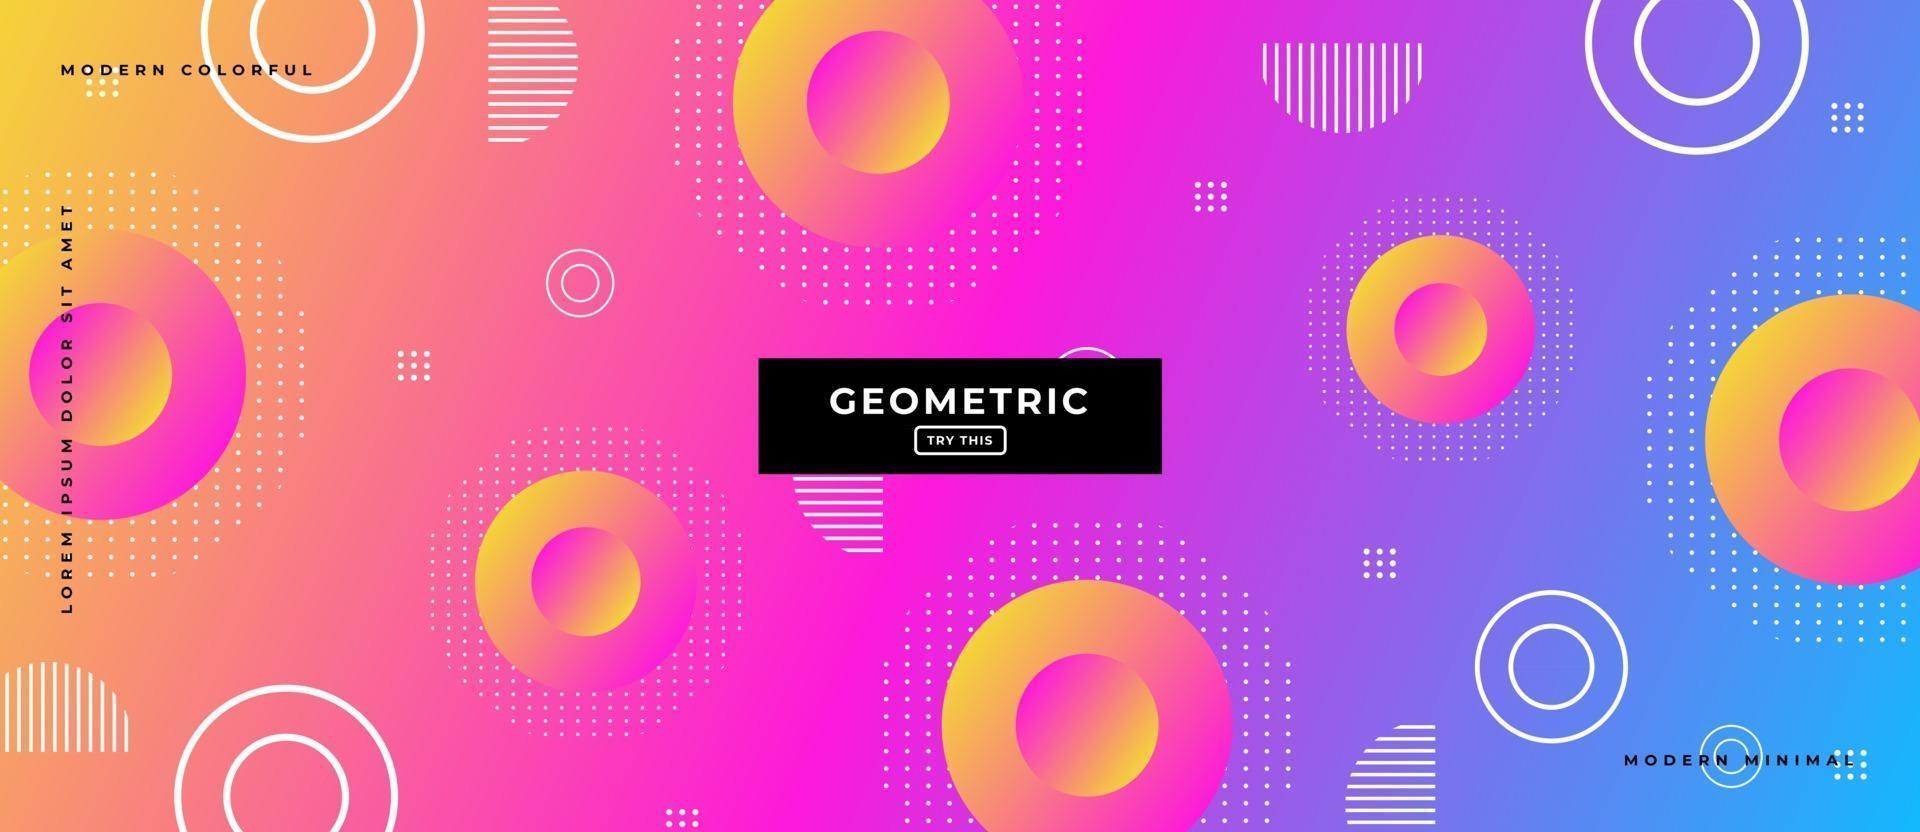 3d Circle Geometric Shapes in Multicolor Gradient Background. vector